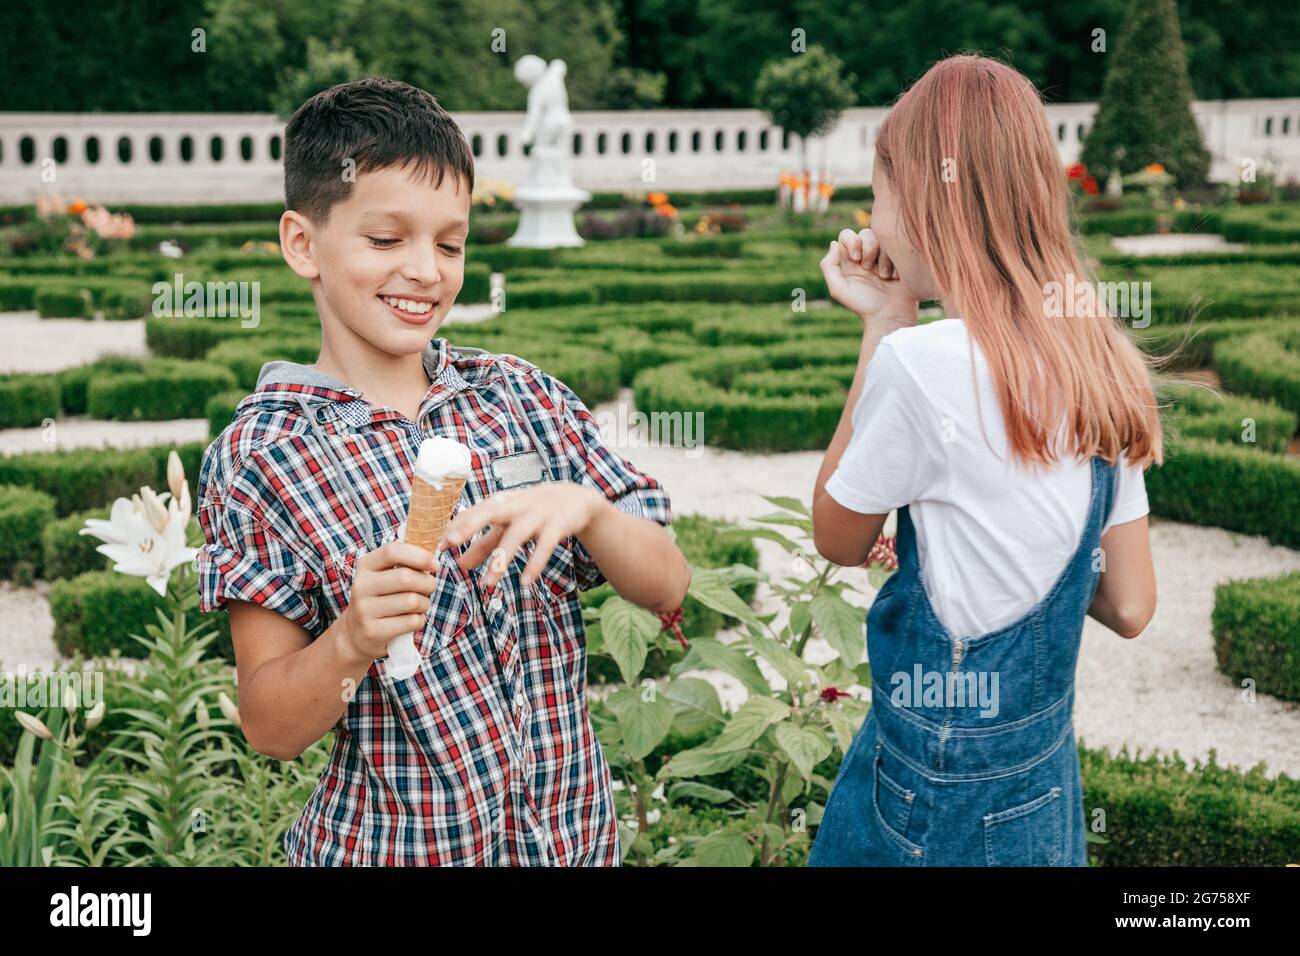 children teenagers boy and girl are having fun on summer day against background of greenery, eating ice cream together Stock Photo